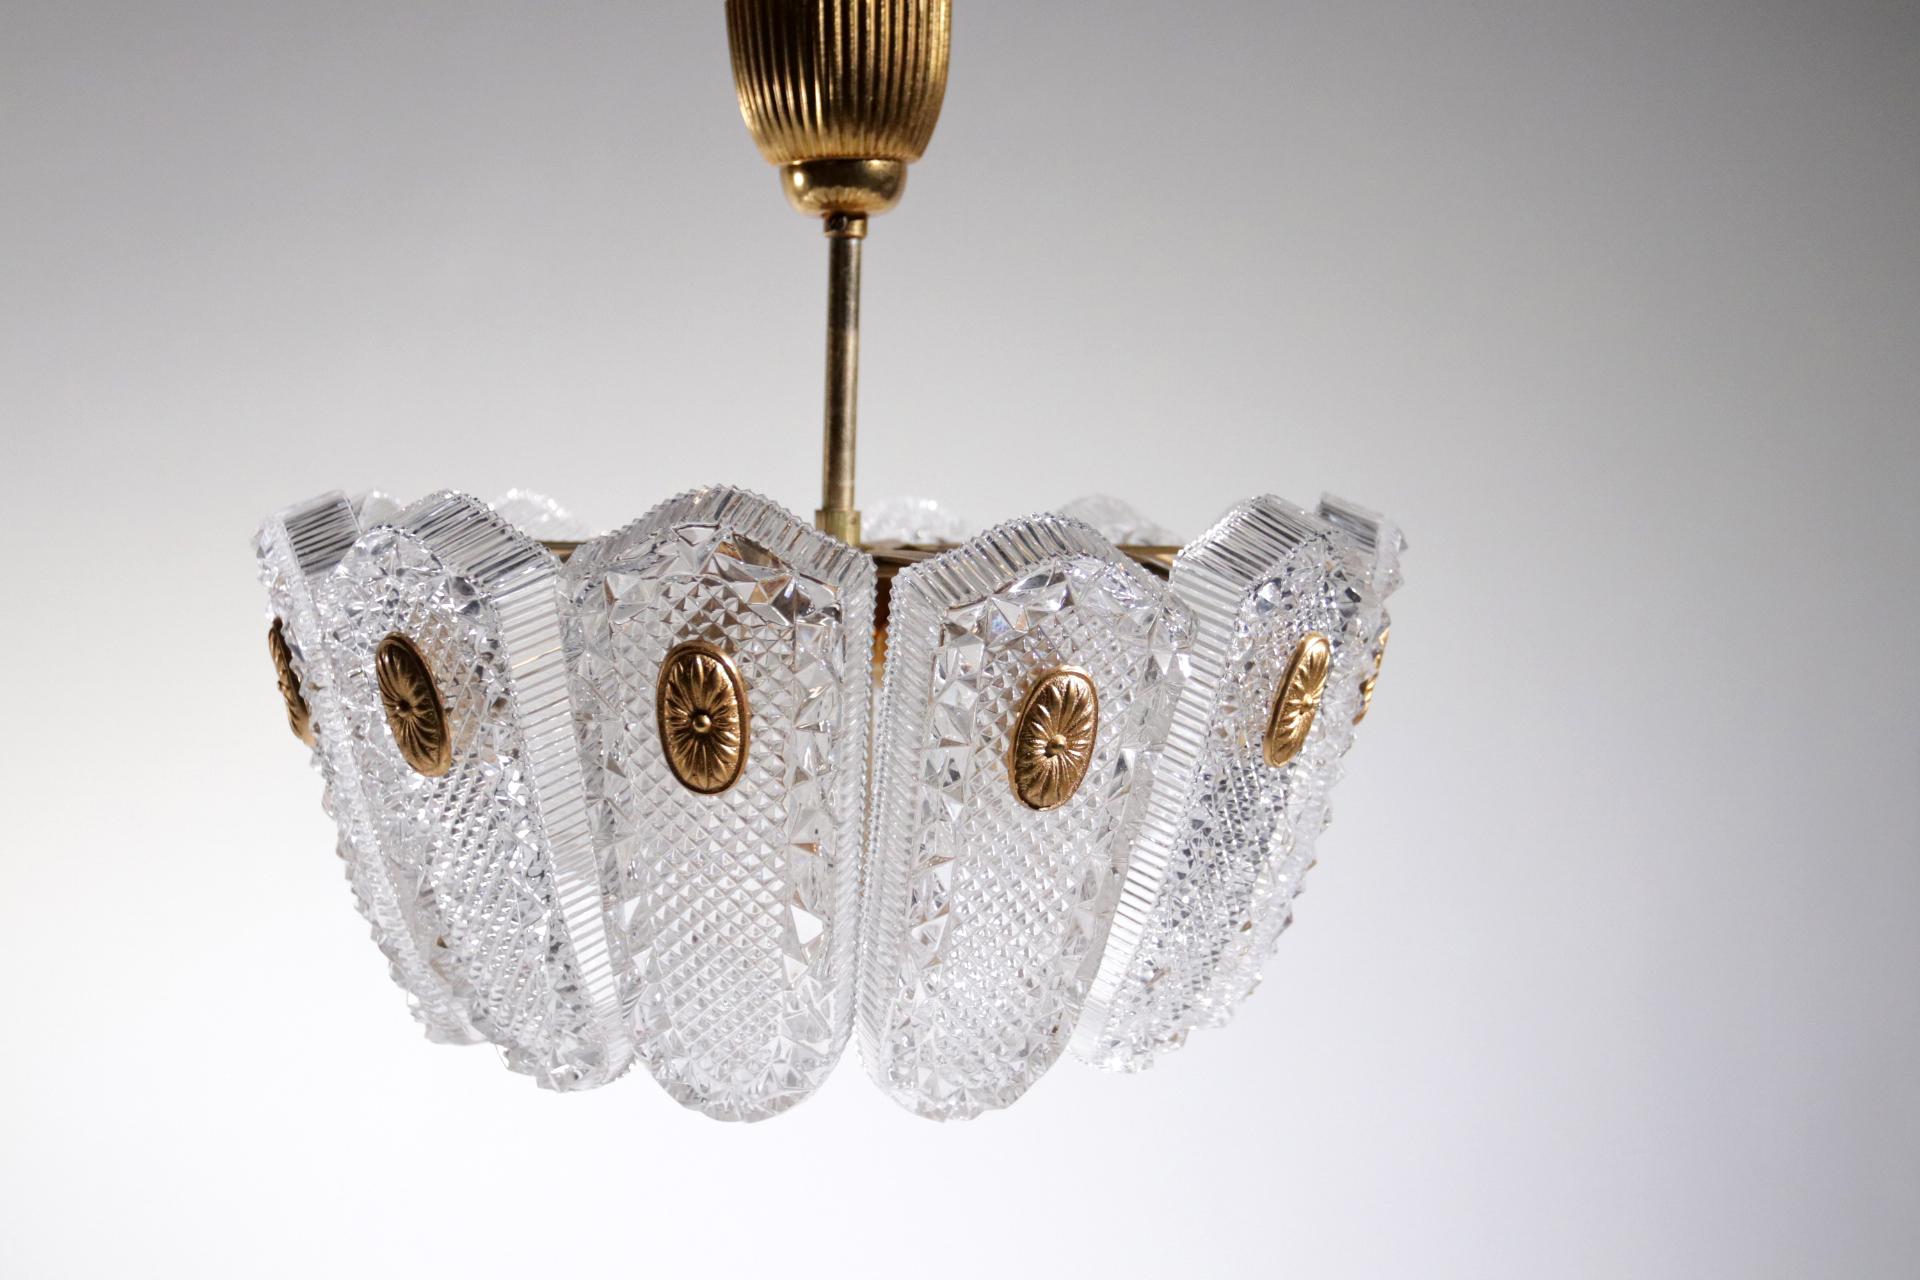 European Hollywood Regency Style Hanging Lamp Gold and Glass, circa 1960